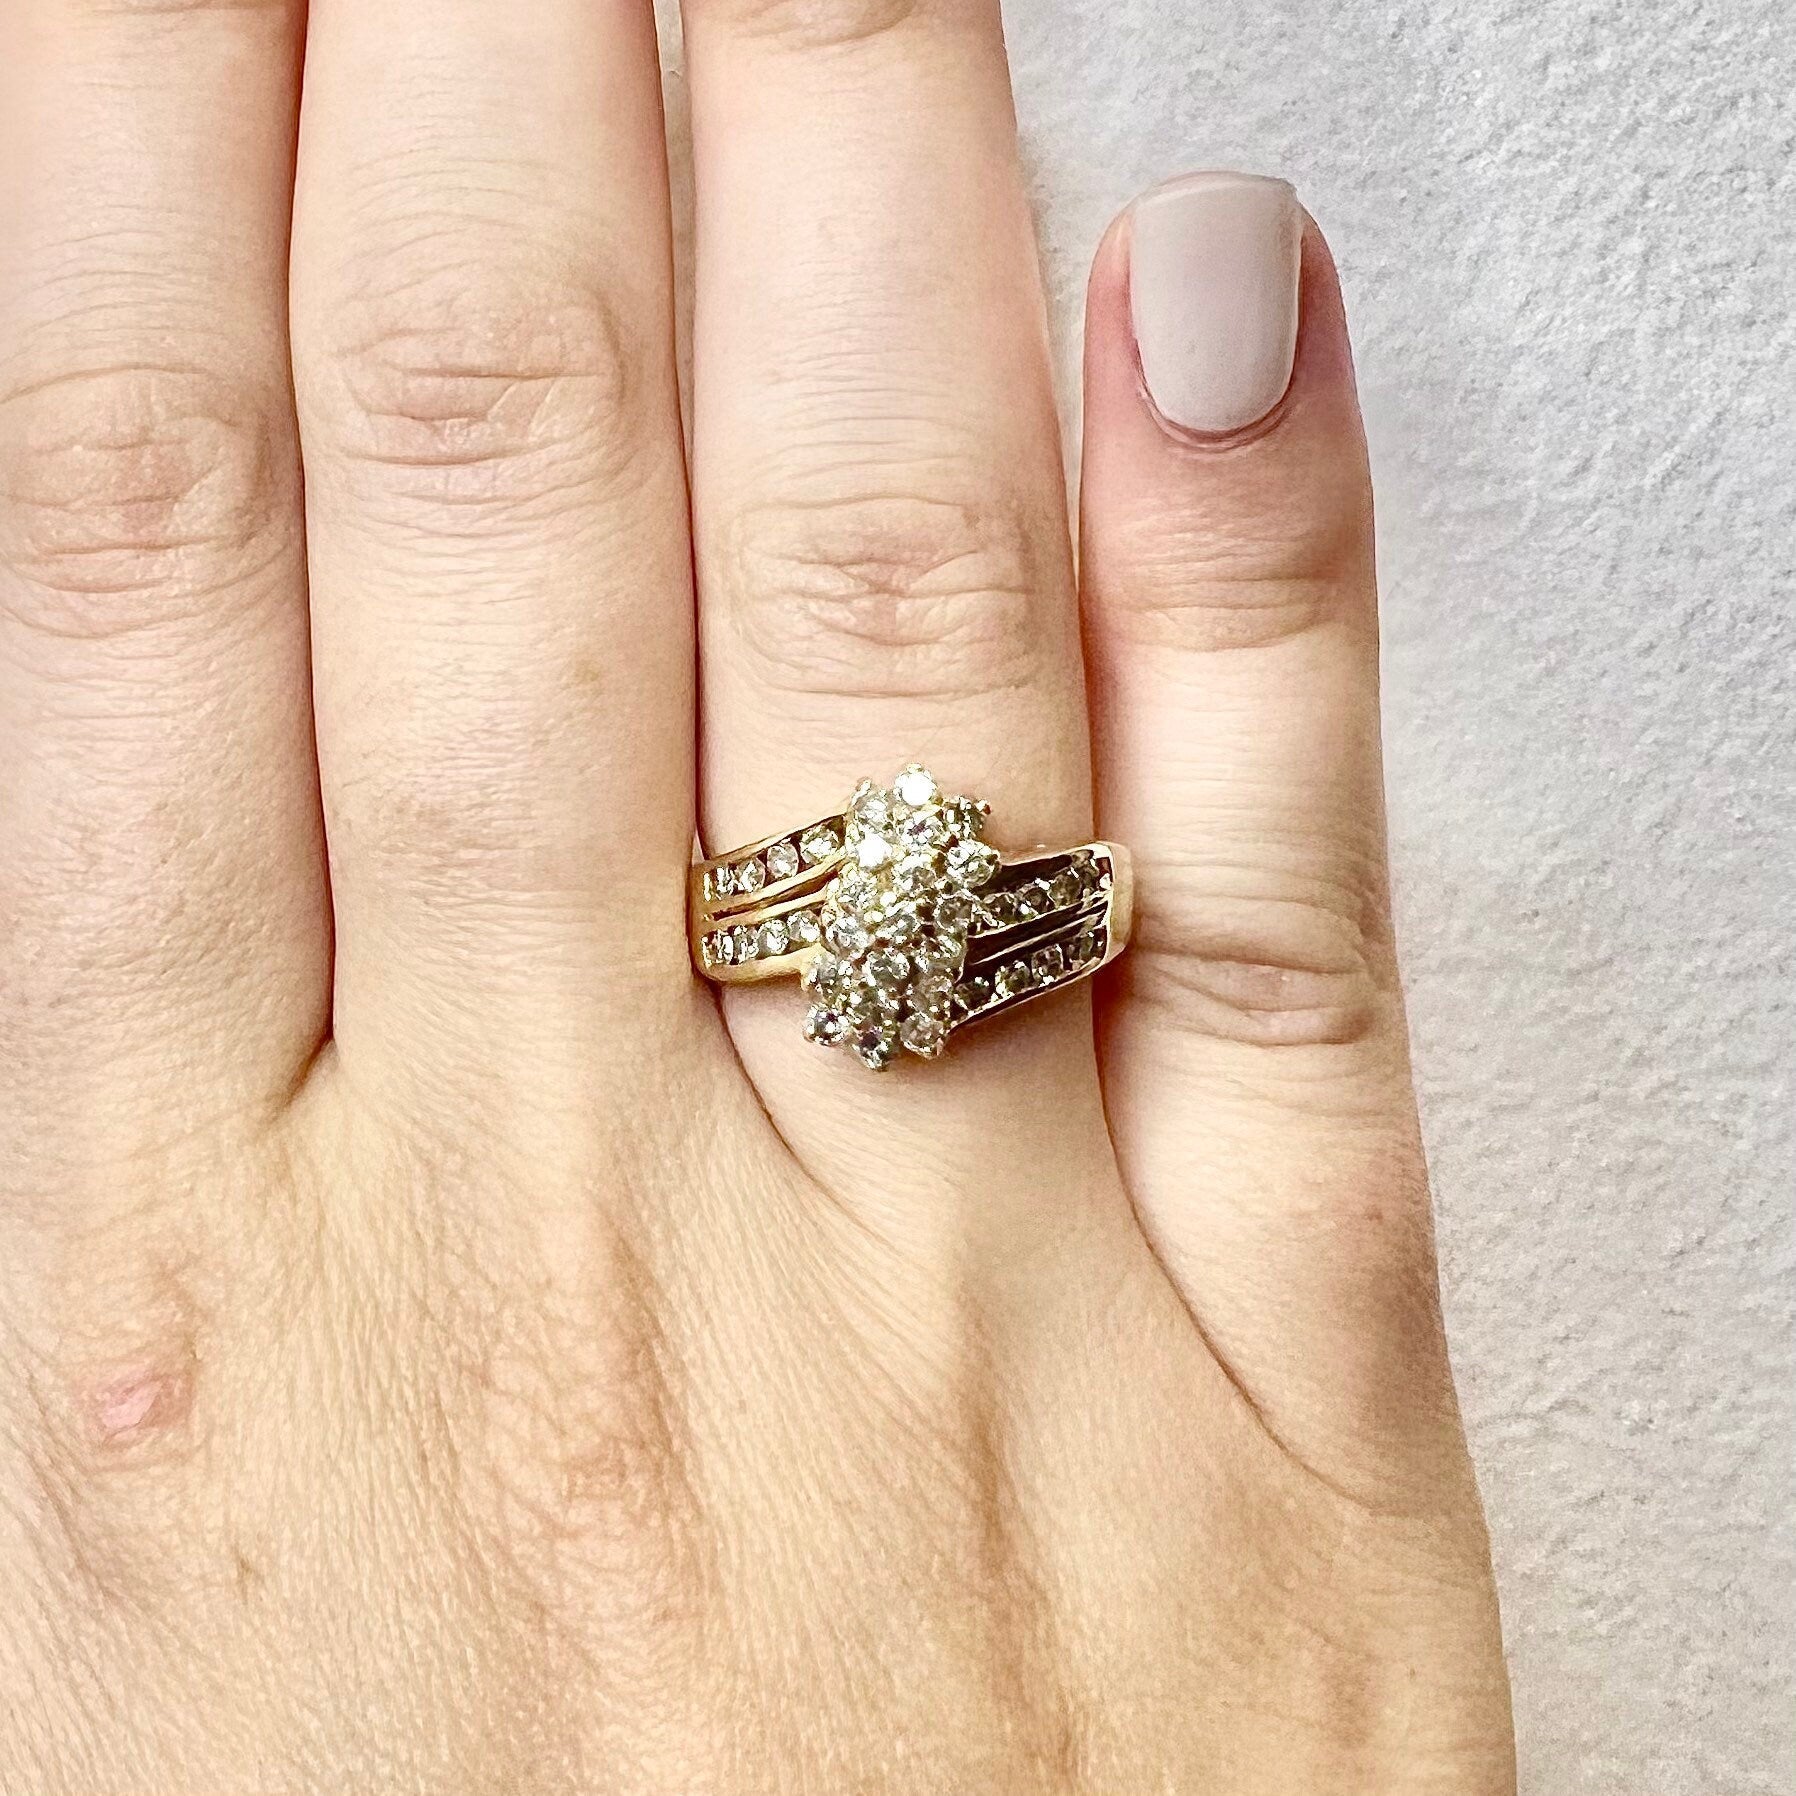 14K Diamond Cluster Ring 0.85 CTTW - Yellow Gold Diamond Cocktail Ring - Engagement Ring - Bypass Anniversary Ring - Best Gift For Her